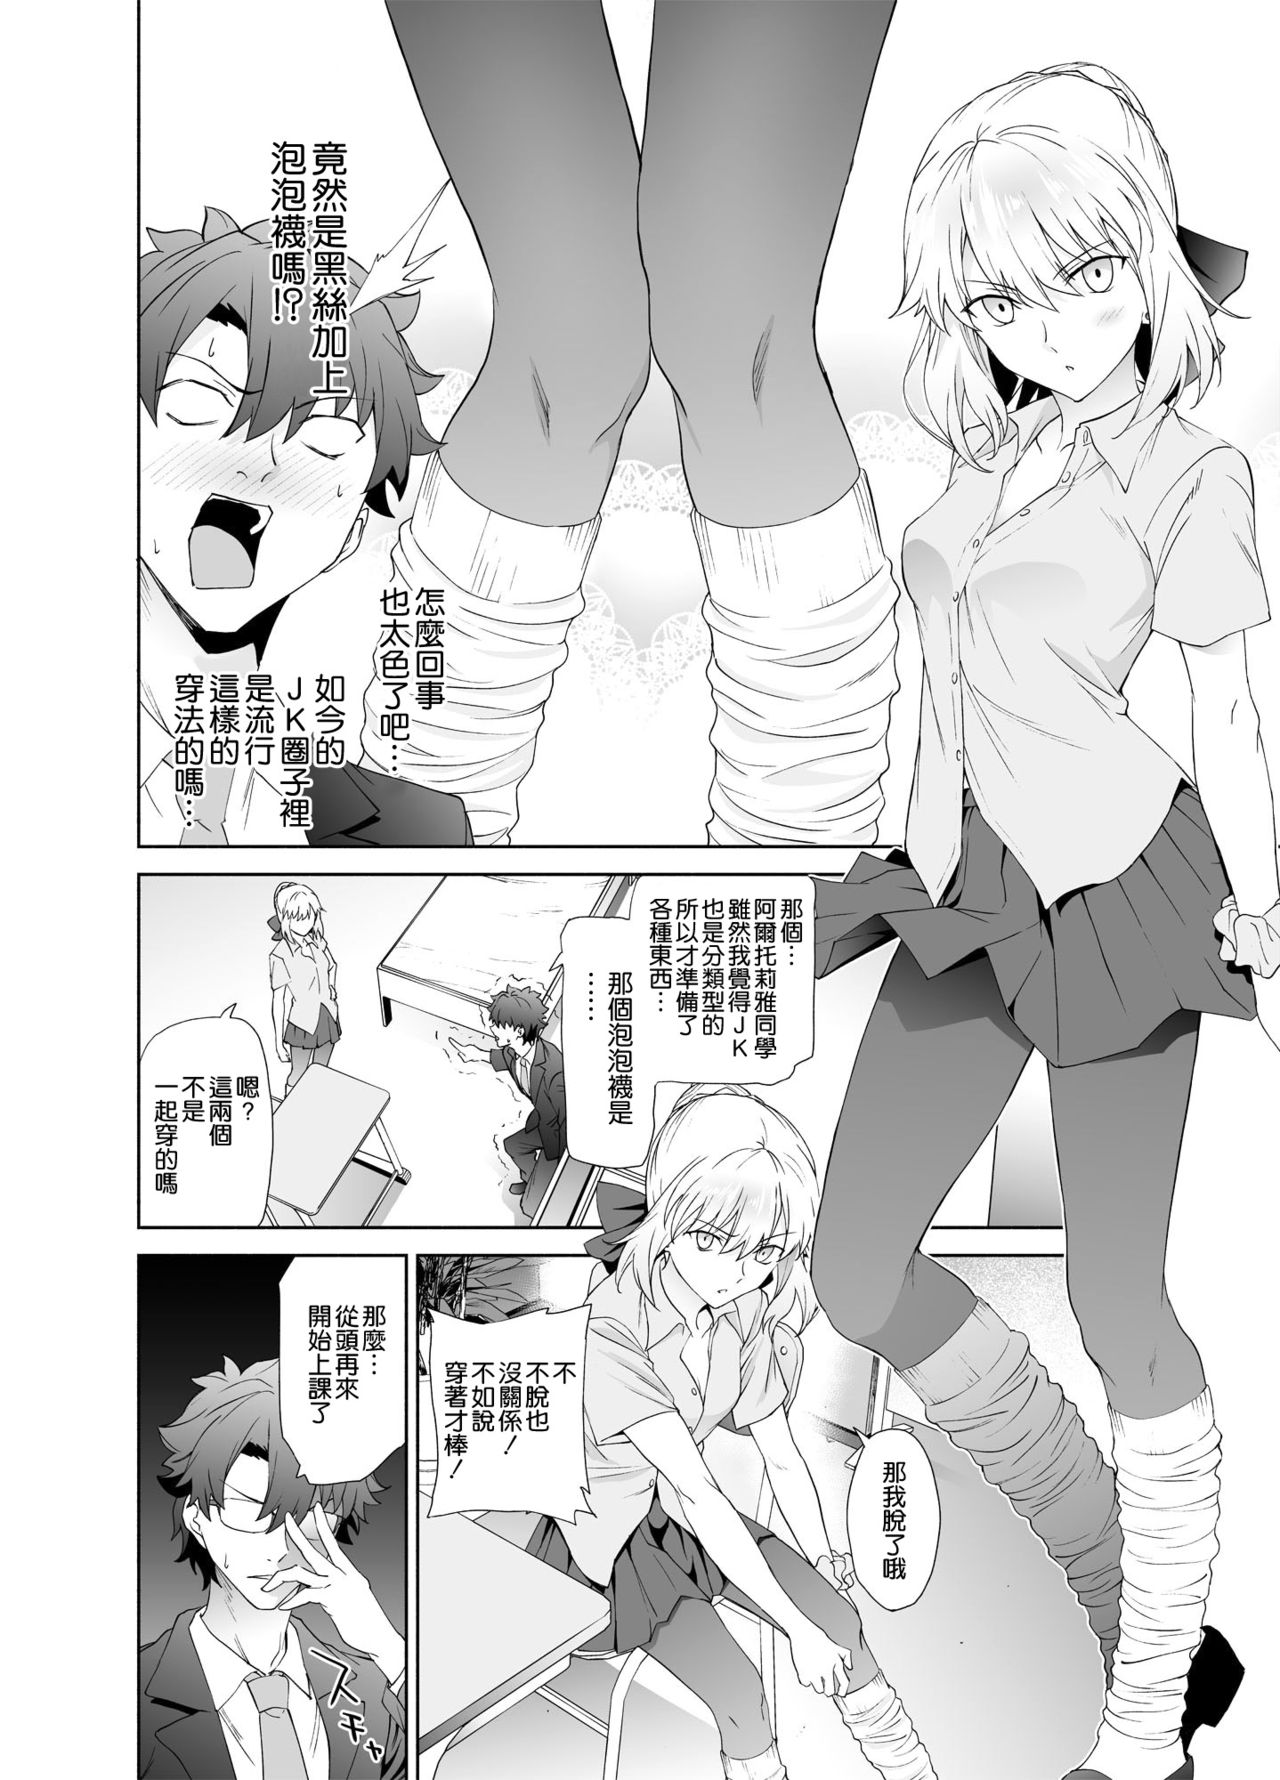 [EXTENDED PART (Endo Yoshiki)] JK Arturia [Alter] (Fate/Grand Order) [Chinese] [空気系☆漢化] [Digital] page 4 full